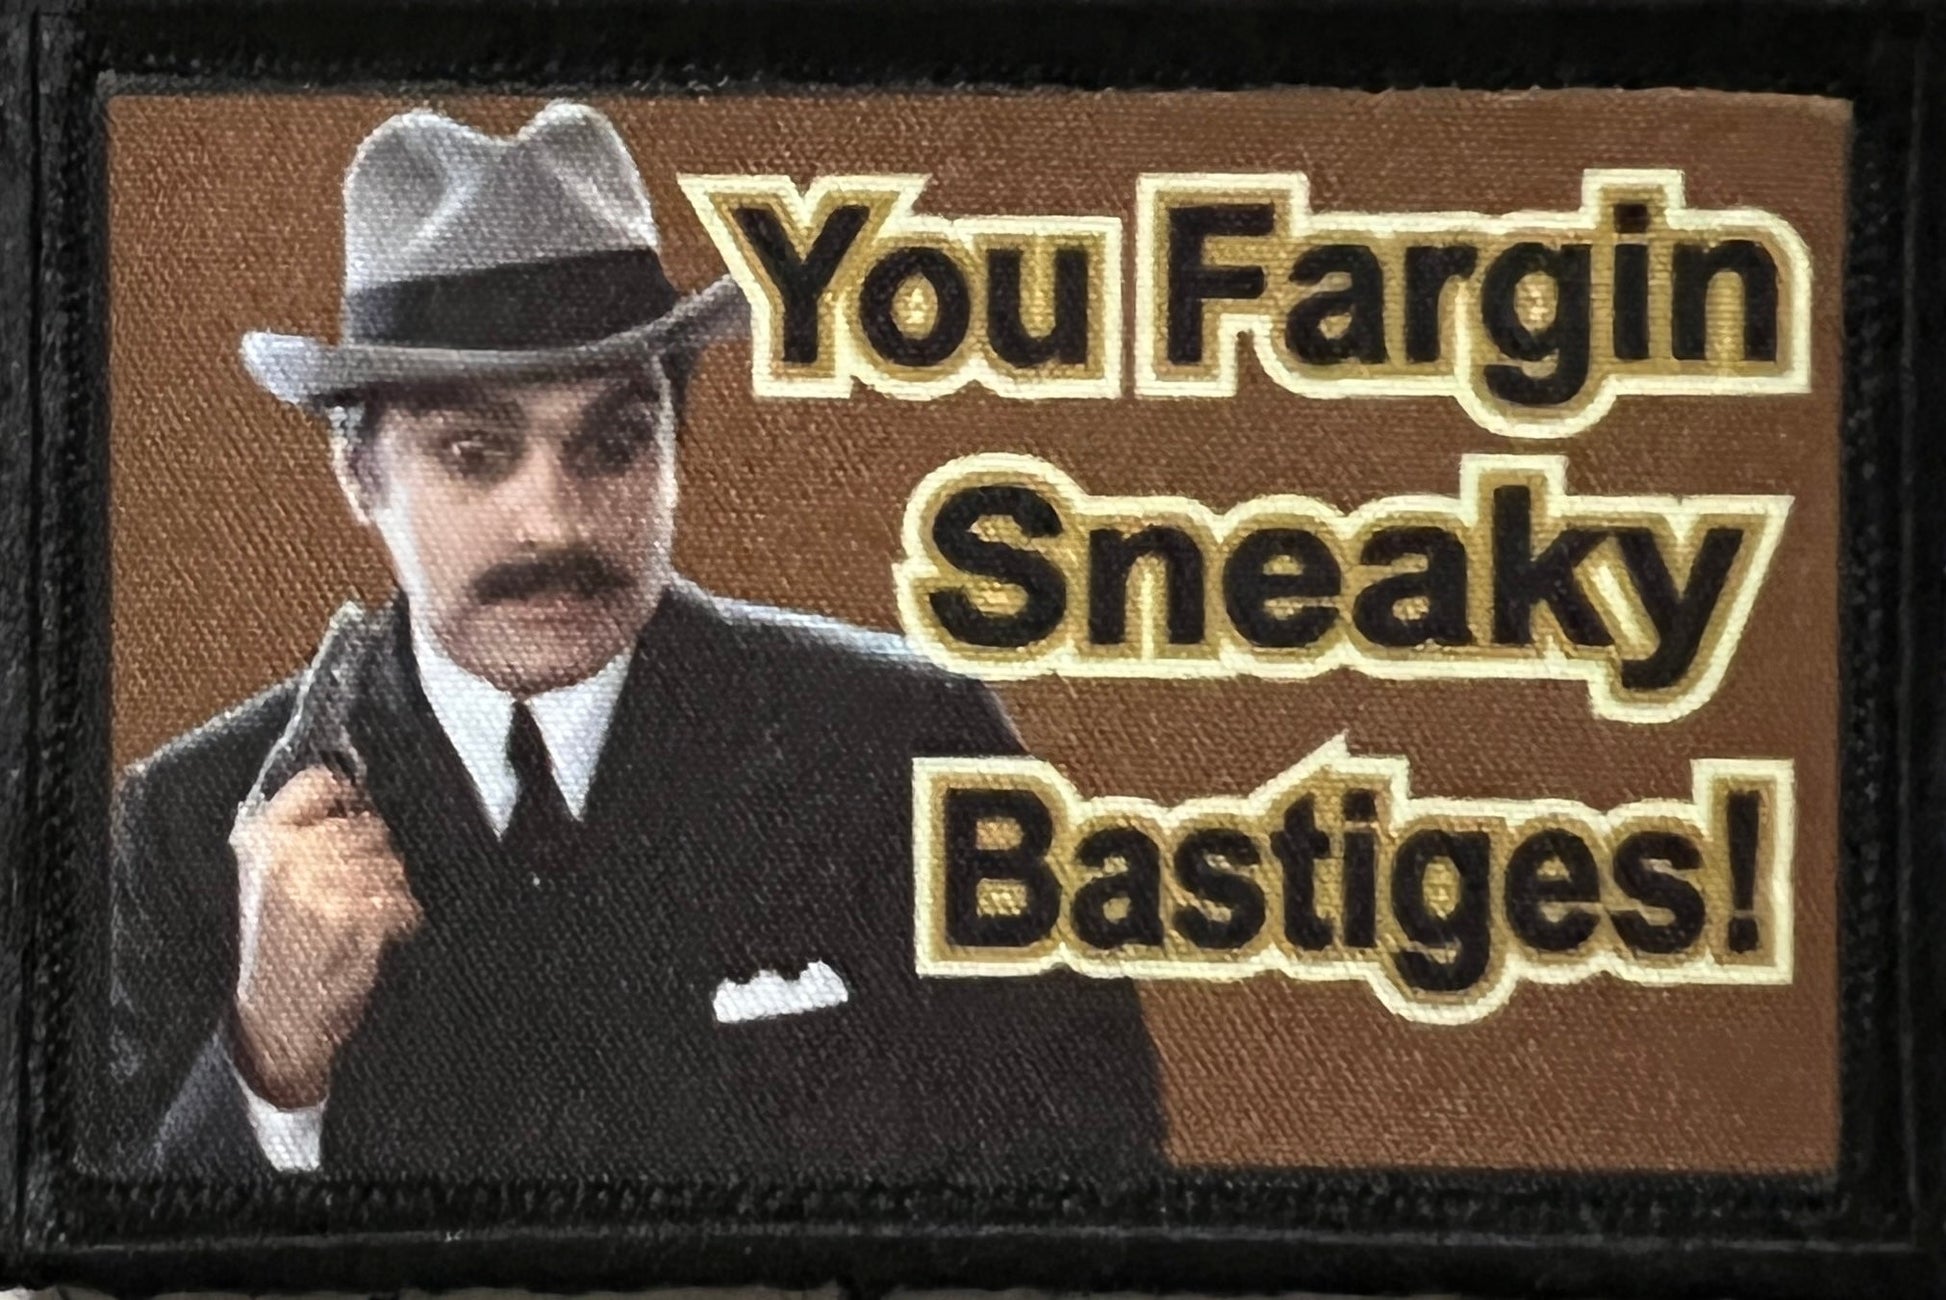 Johnny Dangerously Sneaky Bastiges! Morale Patch – Redheaded T Shirts